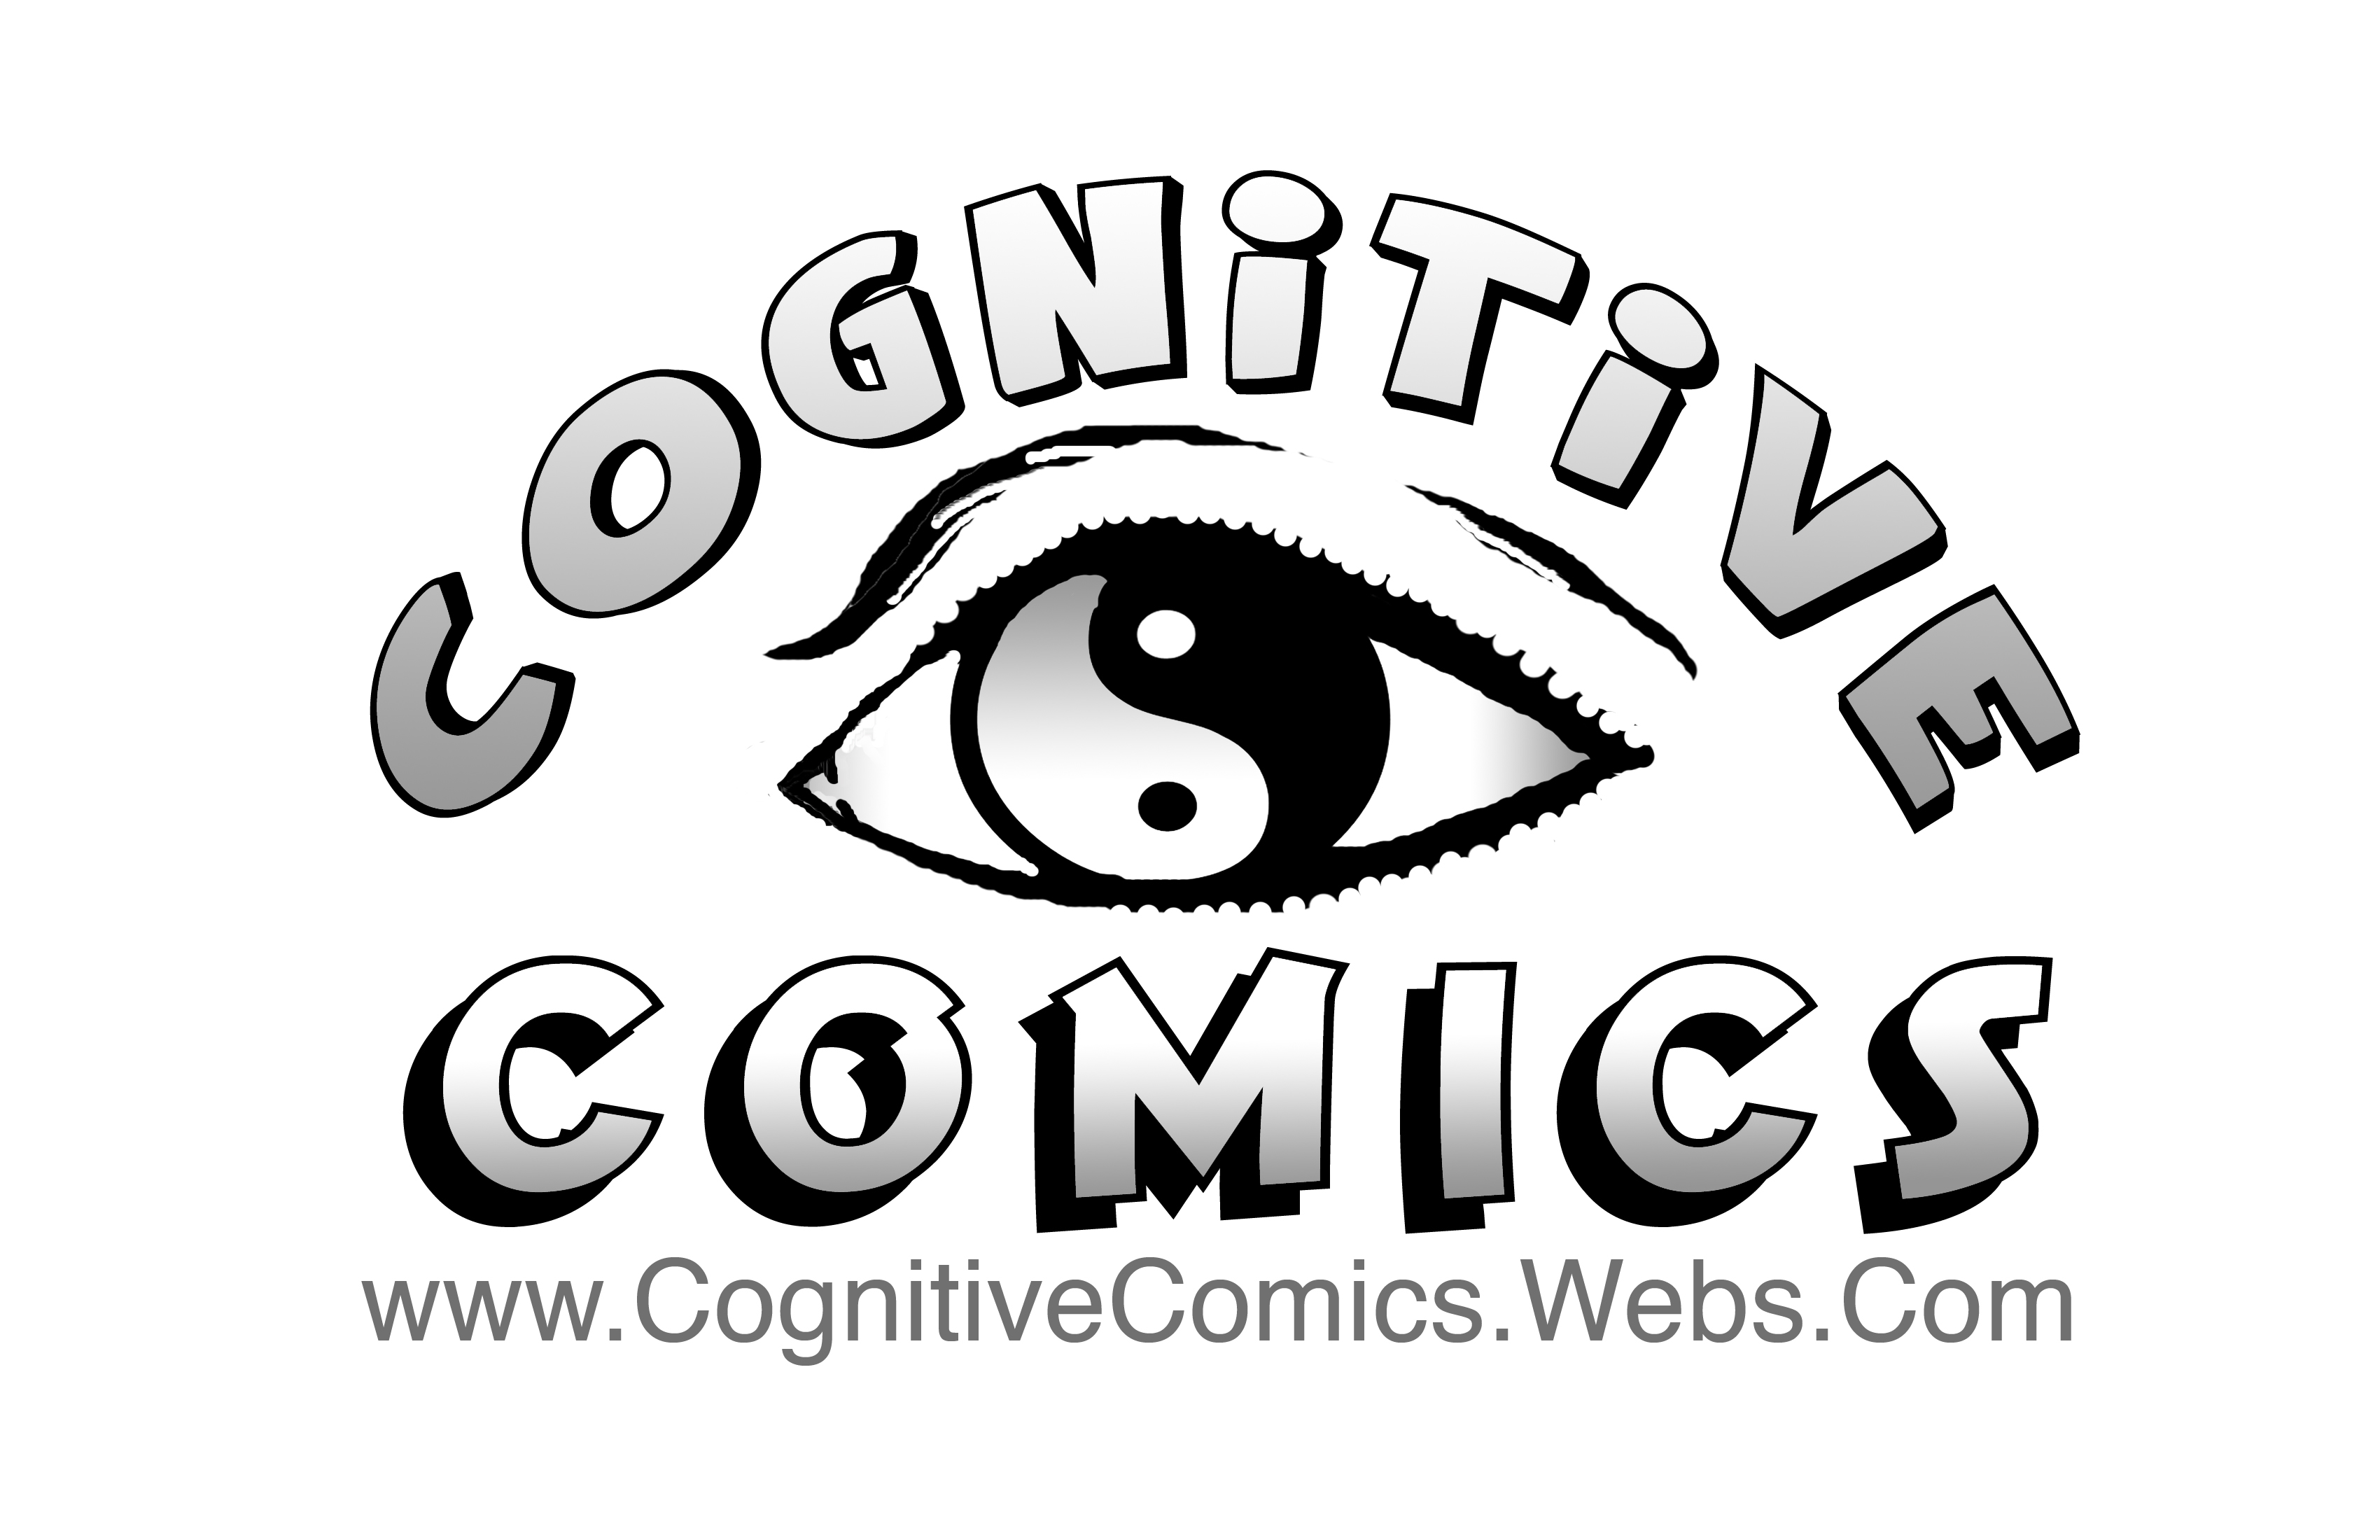 Don Jackson and Cognitive Comics: Bringing Comic Books to the Classroom